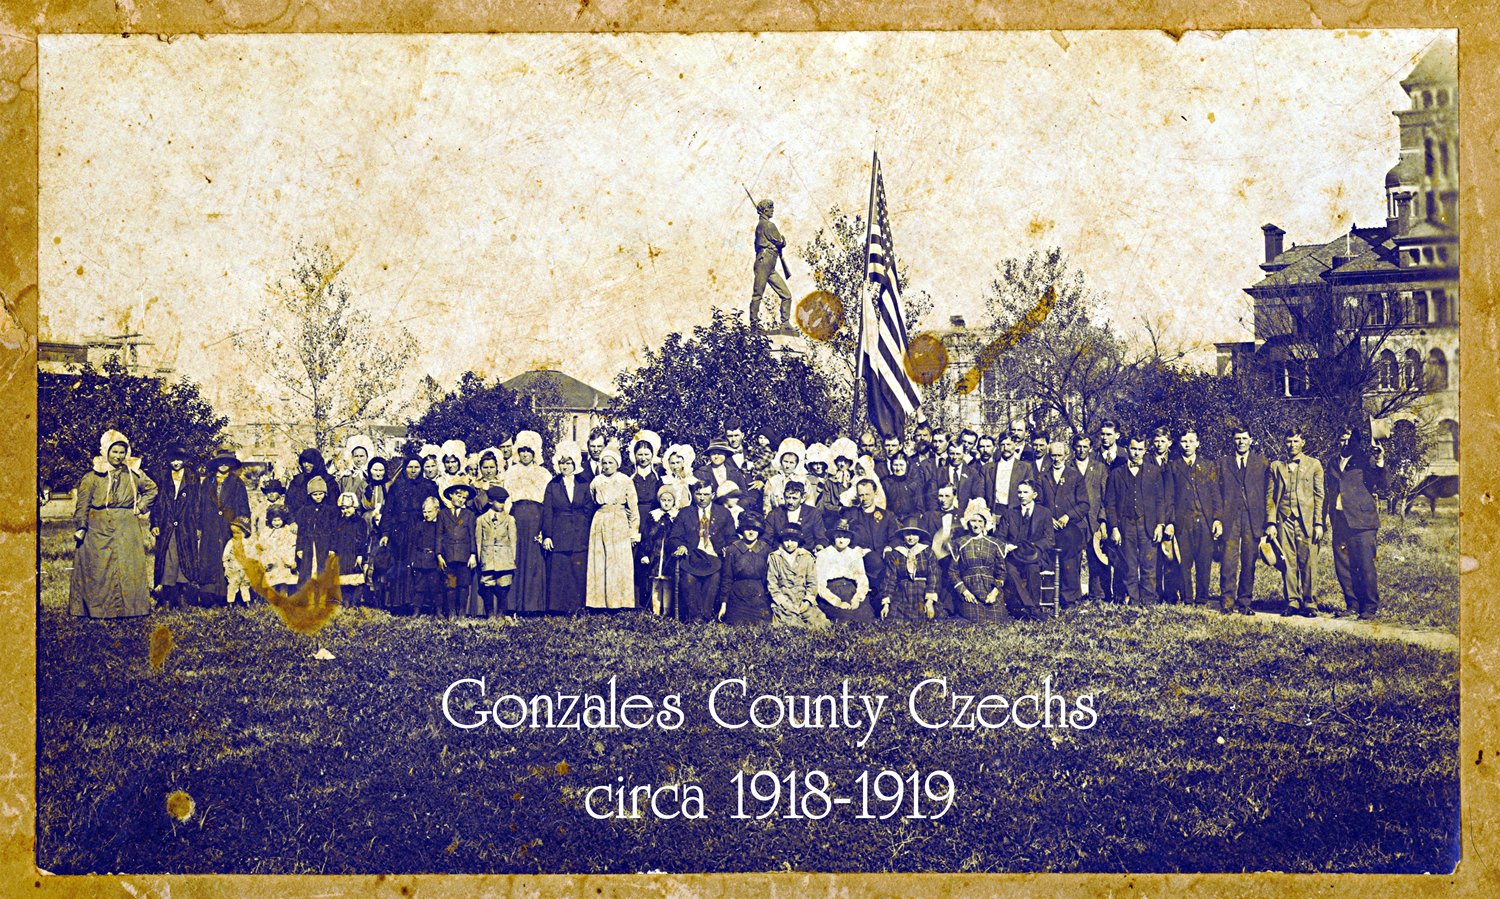 Tens of thousands of men from all across America signed up to fight in World War I, and men in Gonzales were no different. Many of the men from this area with Bohemian signed up to fight and marched off to war overseas in 1917 and 1918.